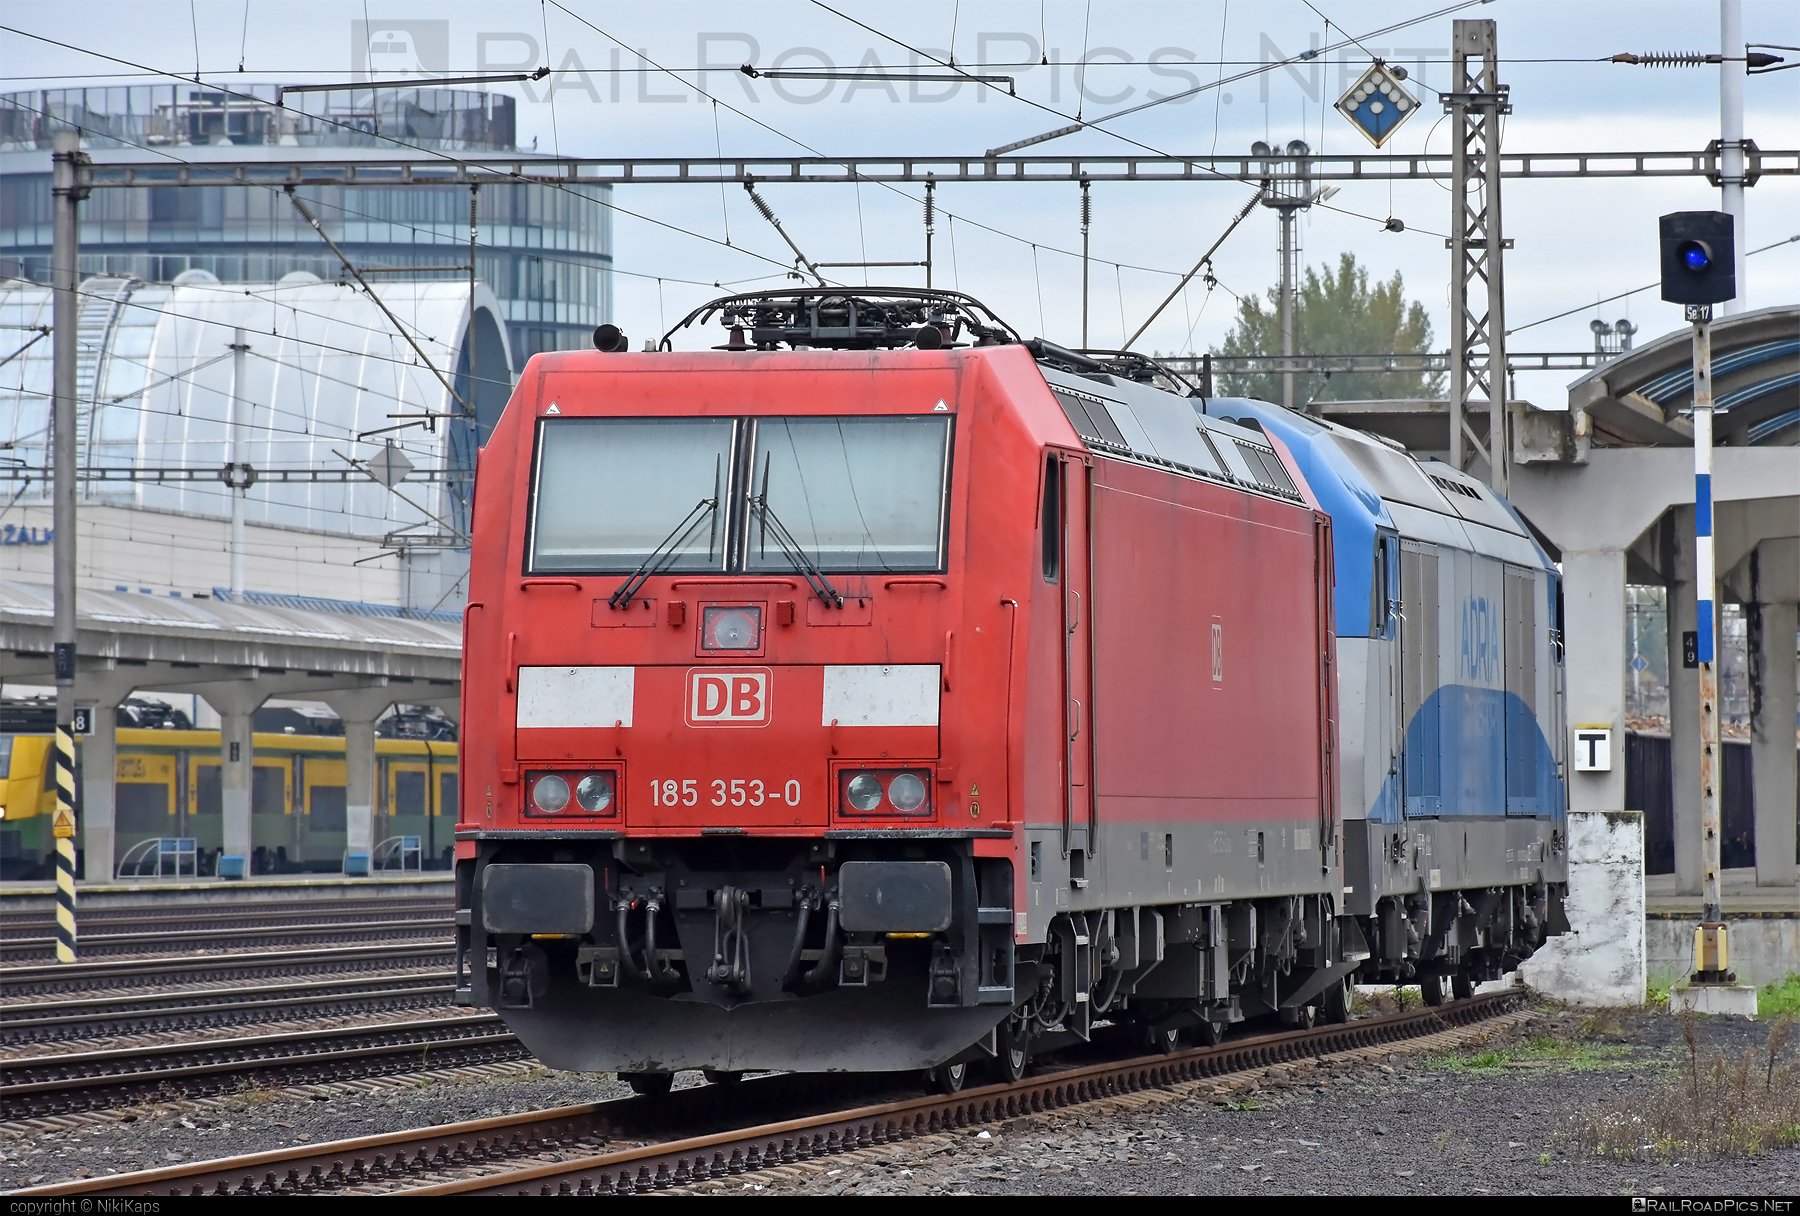 Bombardier TRAXX F140 AC2 - 185 353-0 operated by DB Cargo AG #bombardier #bombardiertraxx #db #dbcargo #dbcargoag #deutschebahn #traxx #traxxf140 #traxxf140ac #traxxf140ac2